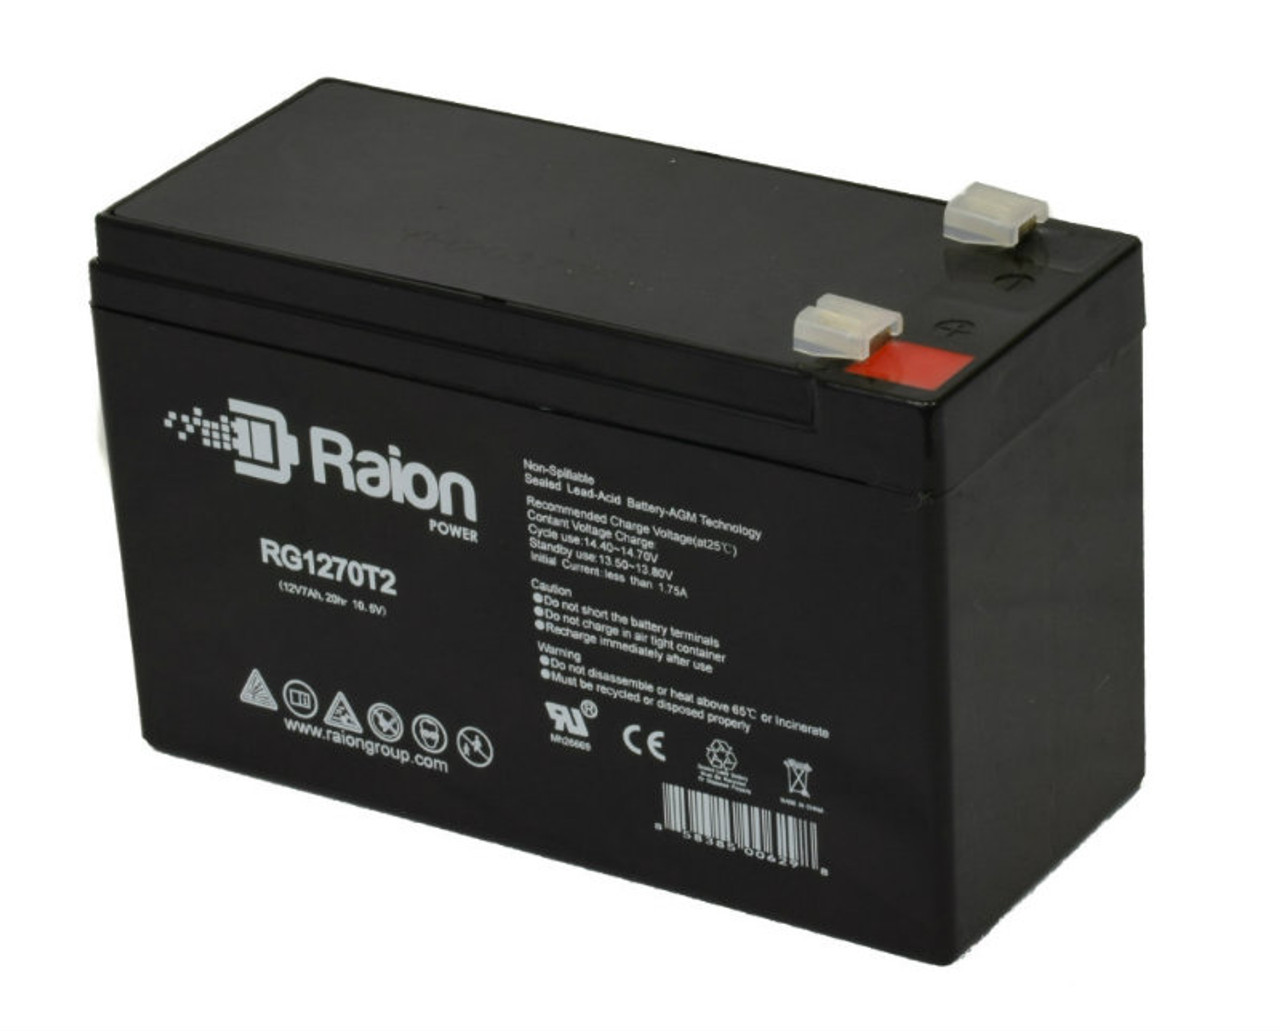 Raion Power RG1270T2 12V 7Ah Rechargeable Battery for Sunlight SPA 12-7